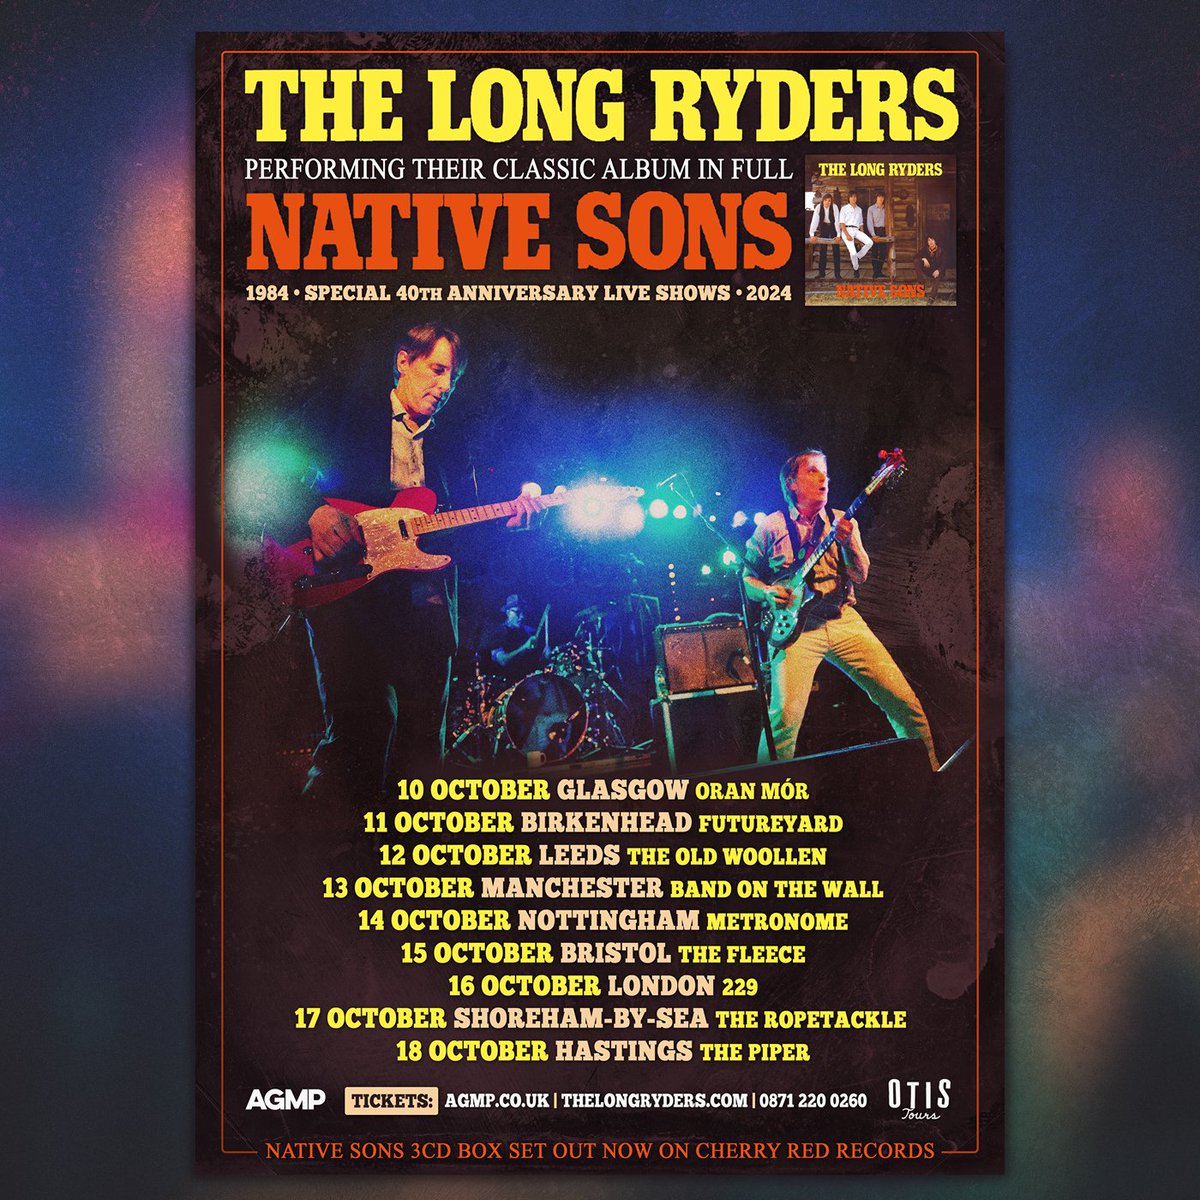 In October the Long Ryders will celebrate the 40th anniversary of their classic Native Sons album. thelongryders.com/tour The band will play the album in order, song by song, as well as performing a set of all-time fan favorites. Please, friends and fans, do NOT miss this tour!